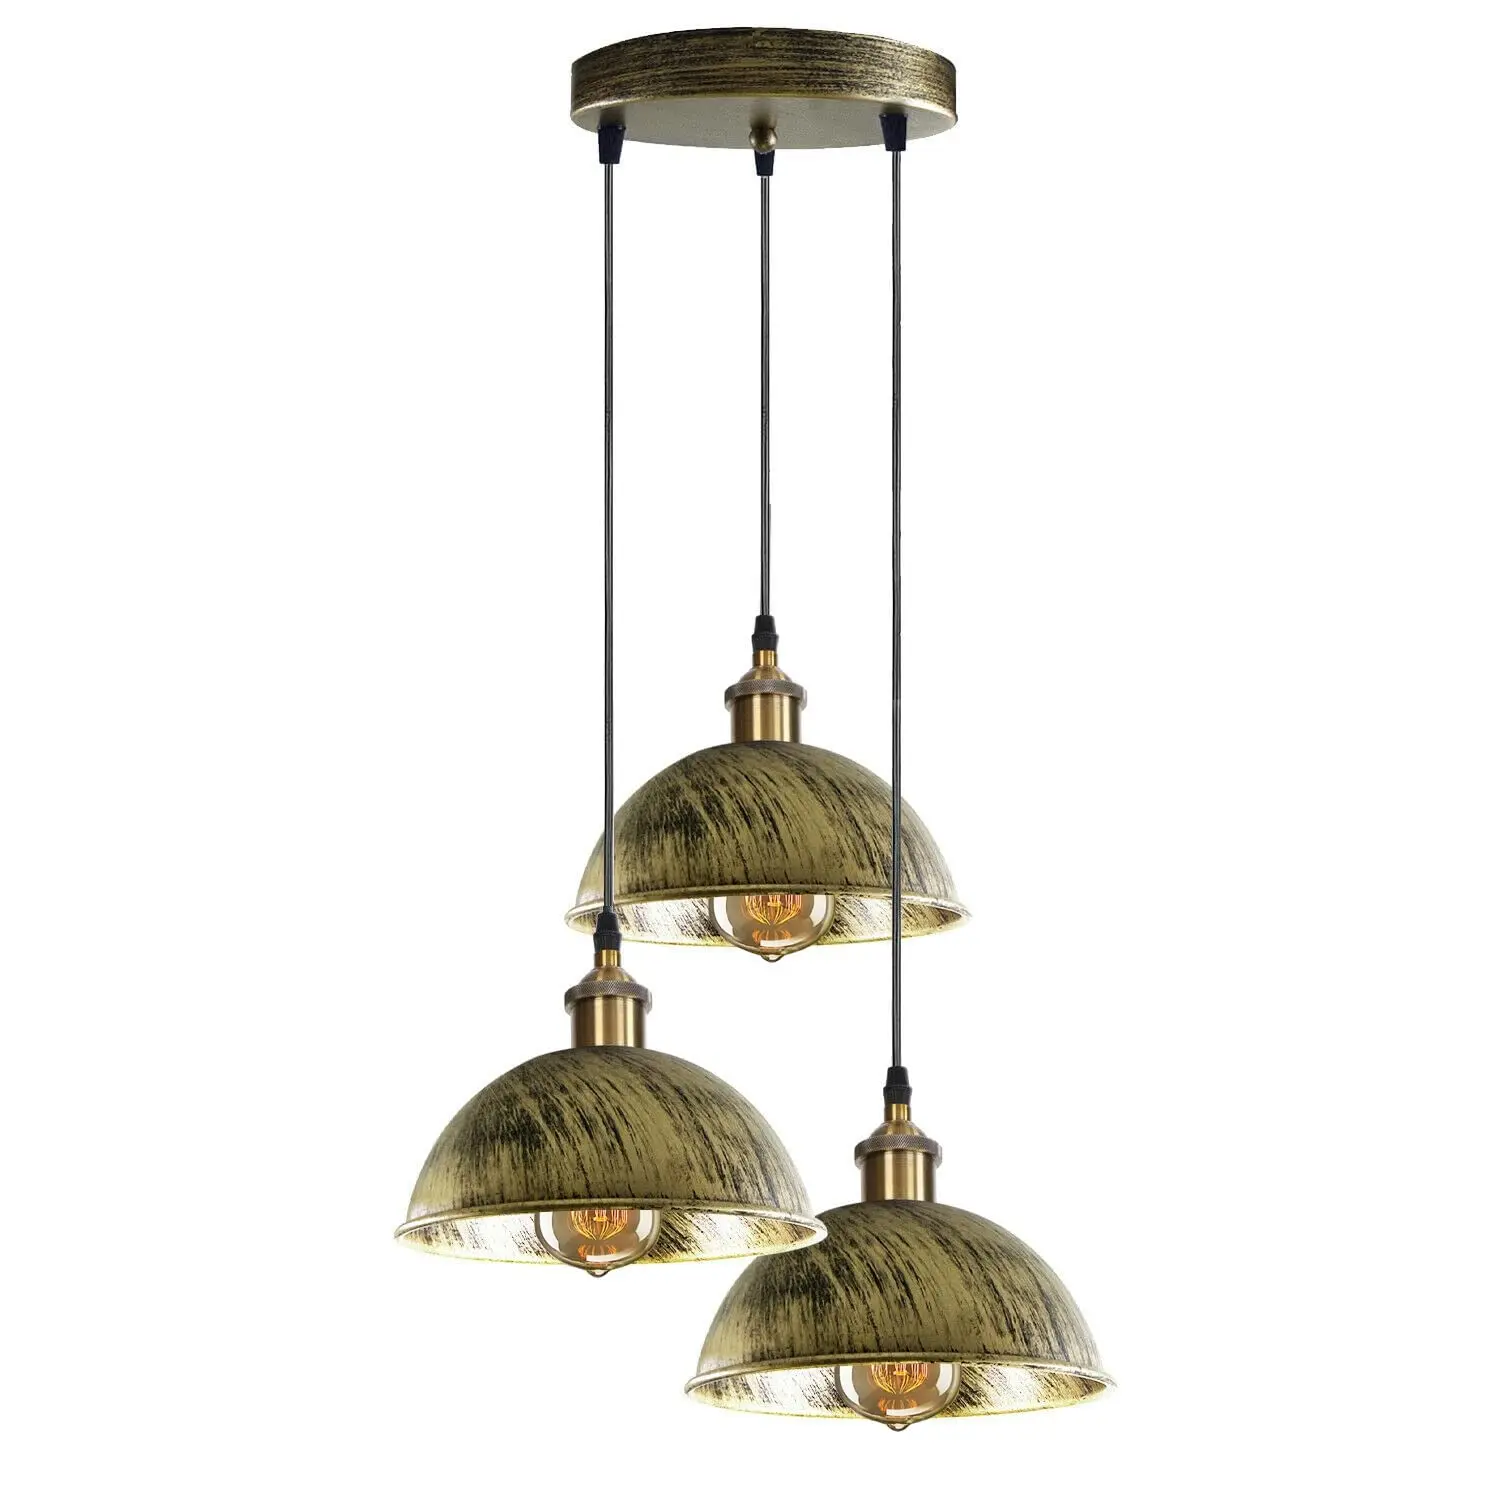 

Vintage Retro Style 3 Way Ceiling Pendant Light Cluster Light Fitting E27 Hanging Light for Kitchen Island Living Room Dining